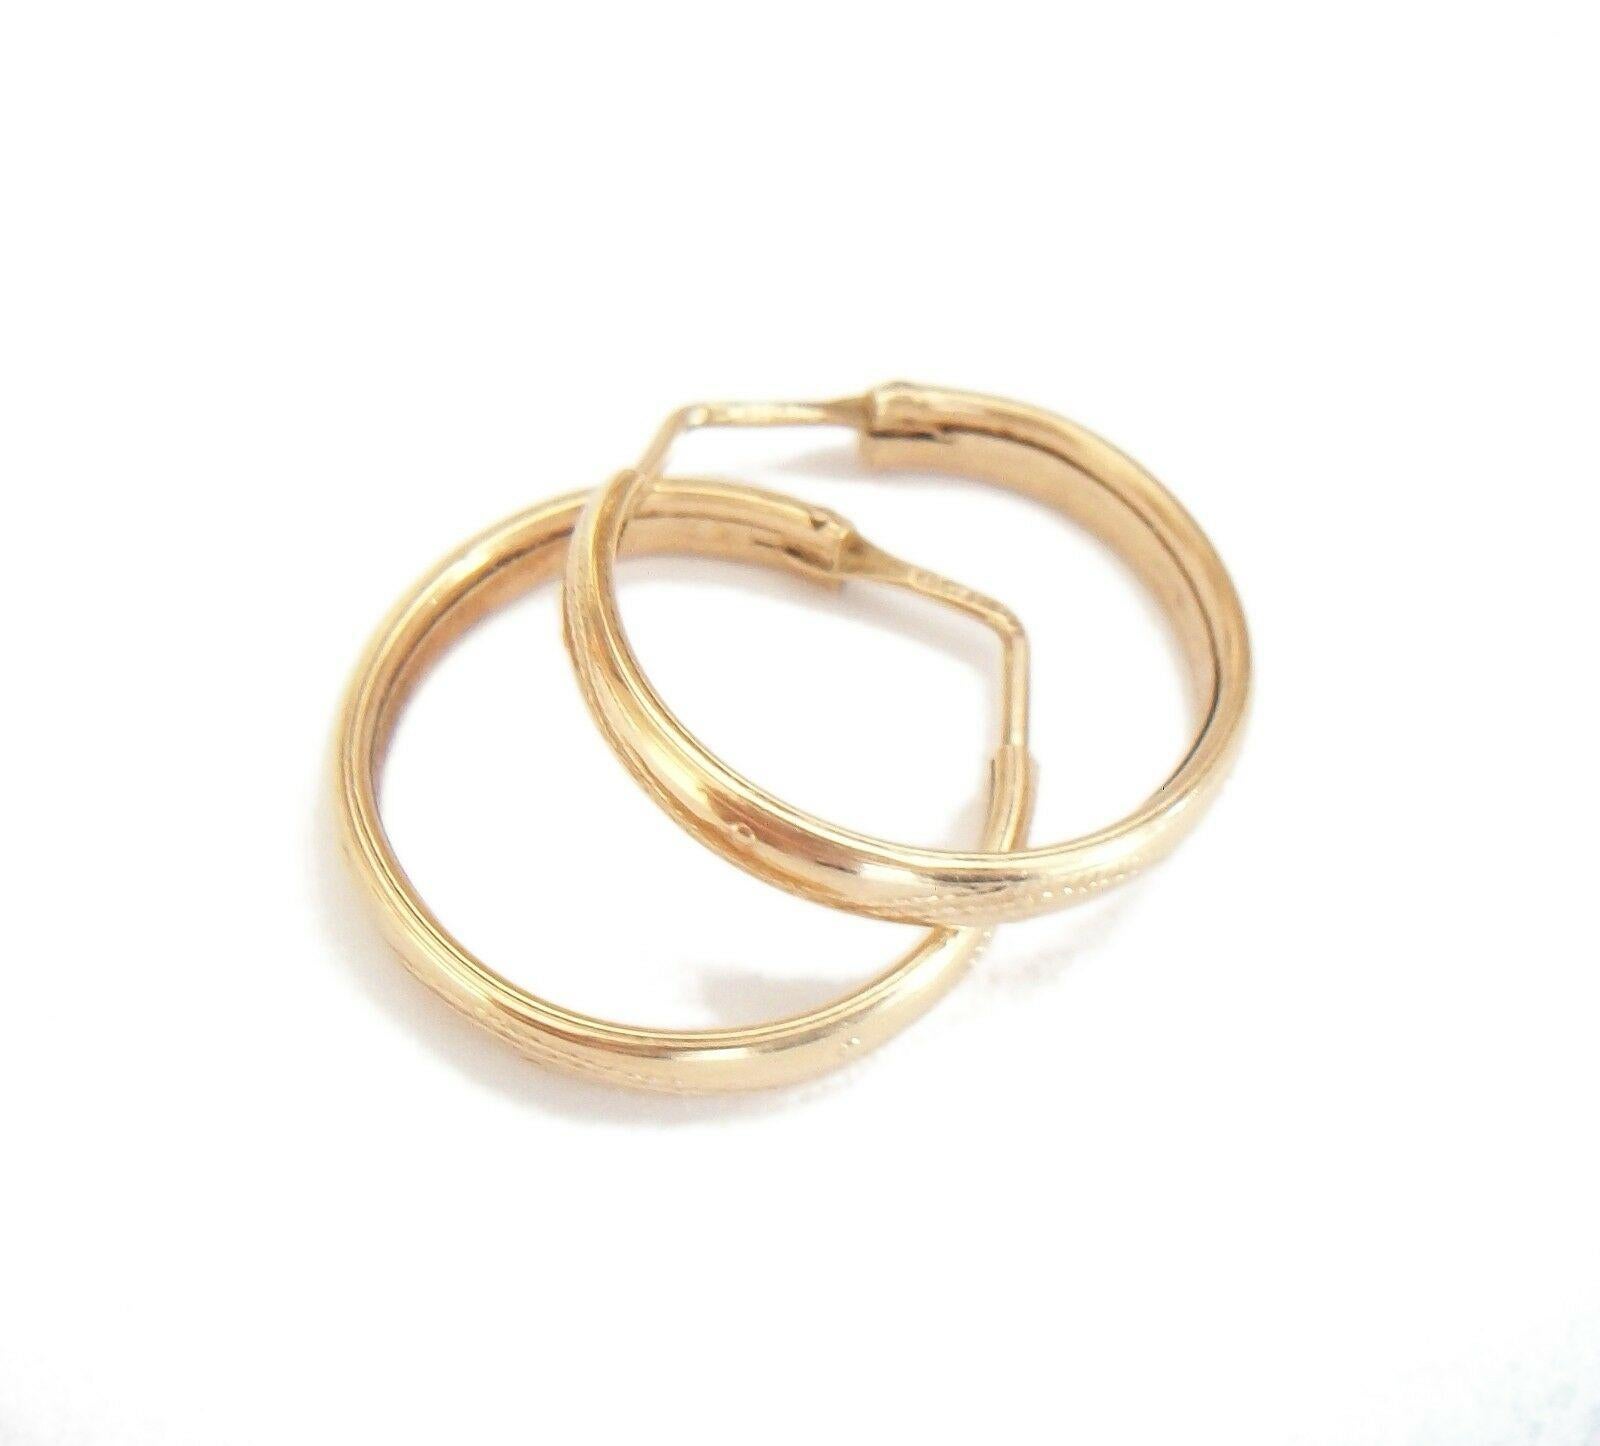 Vintage Vicenza 14K yellow gold hoop earrings - the hoops reverse stamped with a subtle meandering vine and raised rivet design - hand made - gold hallmarks 585 to each hook along with an unidentified maker number and 'VI' (Vicenza) - Italy - mid